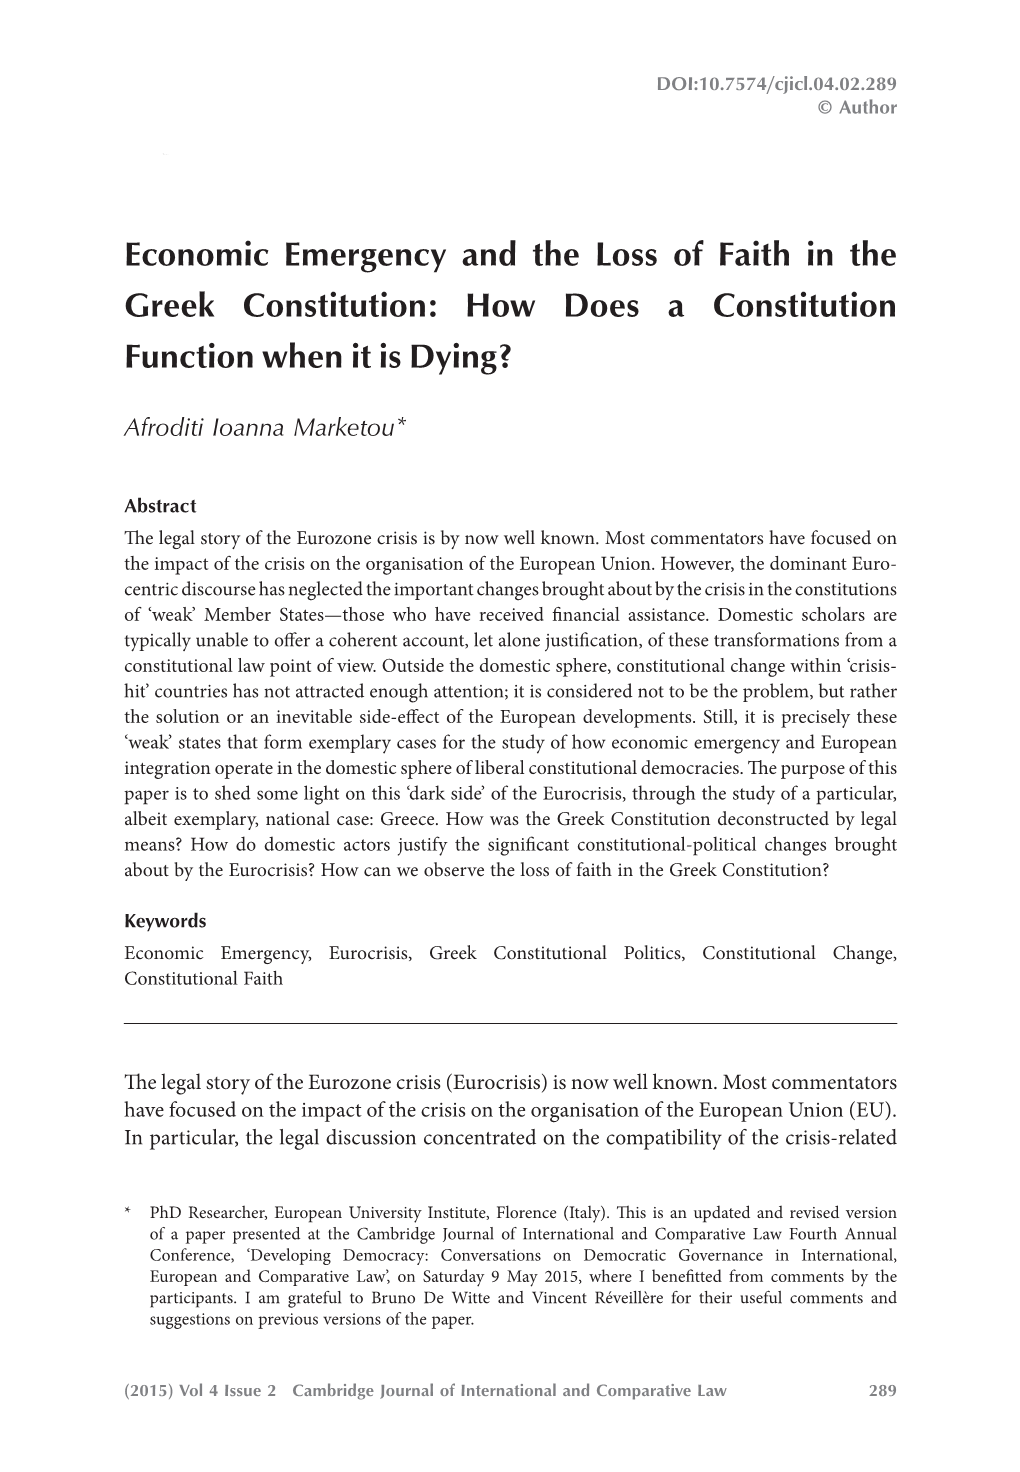 Economic Emergency and the Loss of Faith in the Greek Constitution Afroditi Ioanna Marketou